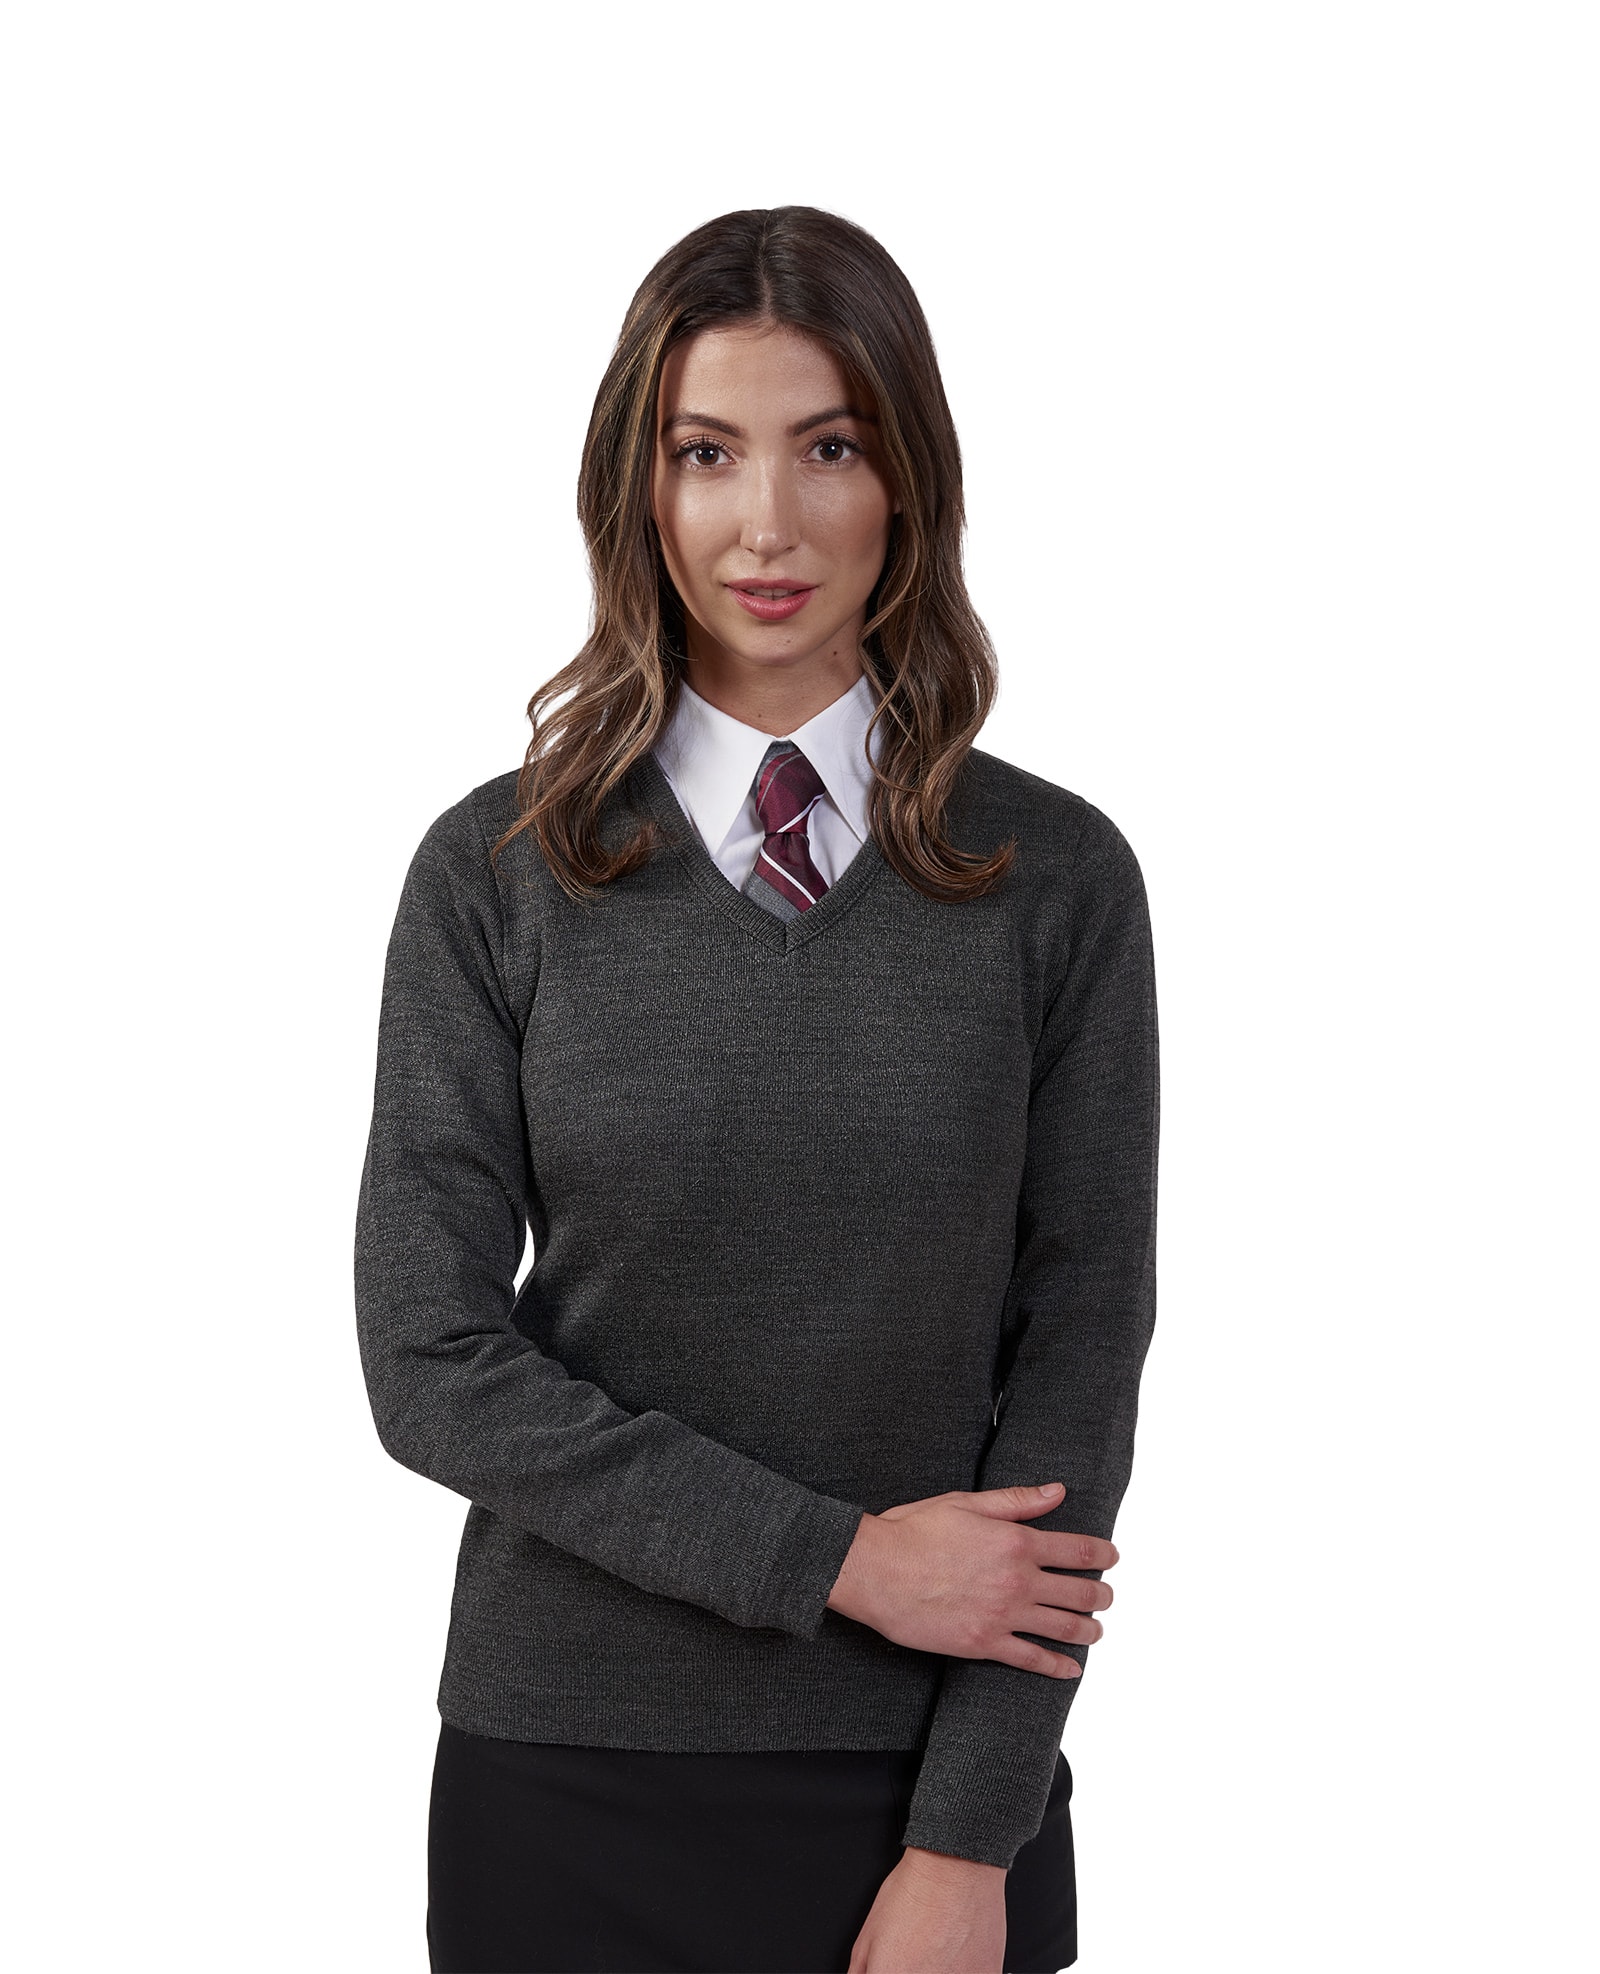 woman wearing grey v-neck corporate sweater